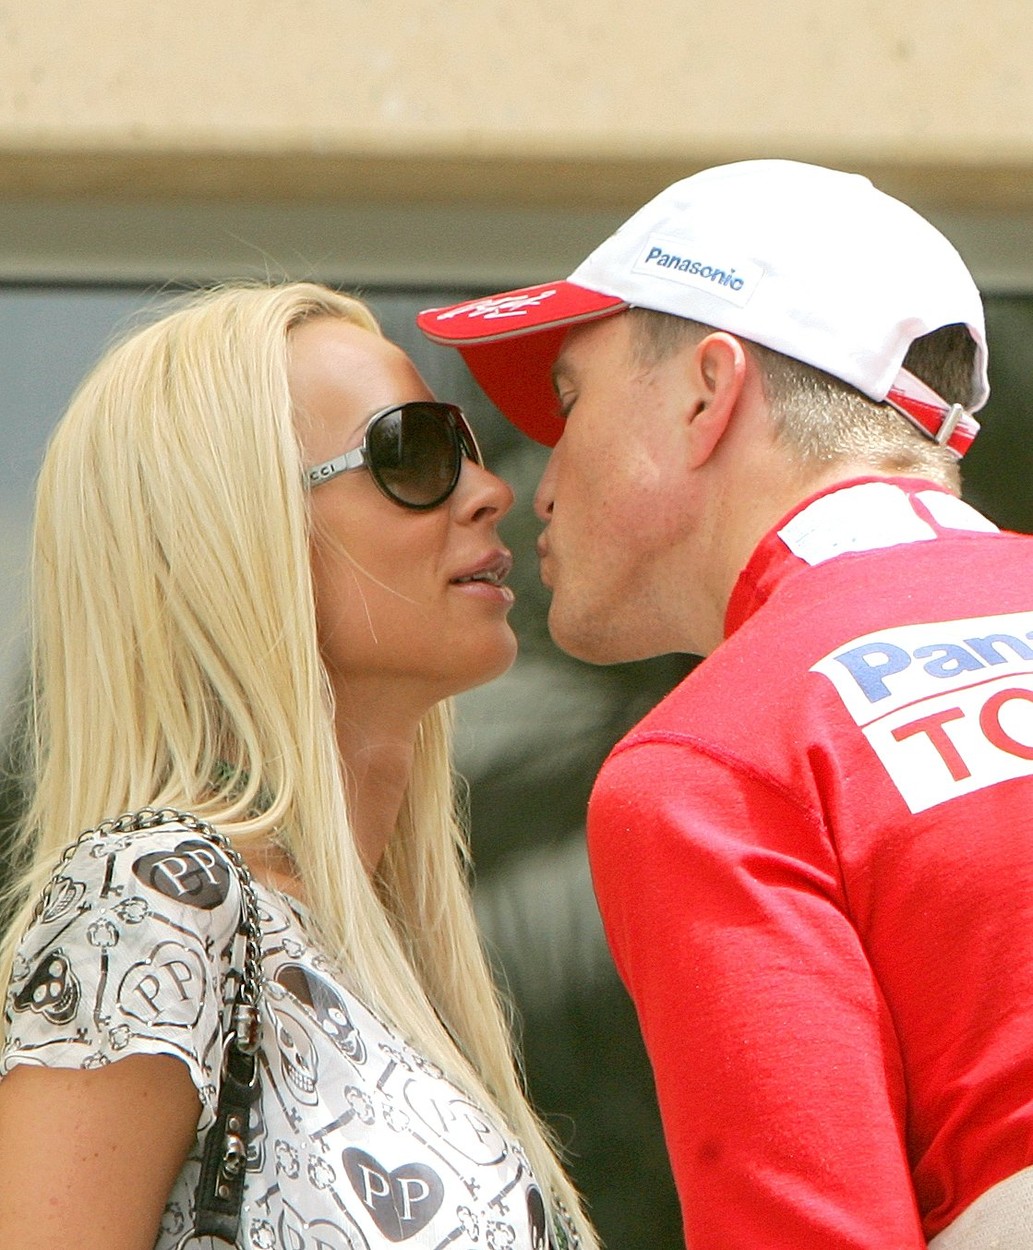 German Formula One driver Ralf Schumacher (R) of Toyota Racing kisses his wife Cora in the paddock after the third practice session at the Sakhir circuit near Manama, Bahrain, Saturday 14 April 2007. The 2007 Formula 1 Bahrain Grand Prix will take place on Sunday, 15 April. Photo: CARMEN JASPERSEN,Image: 678119085, License: Rights-managed, Restrictions: , Model Release: no